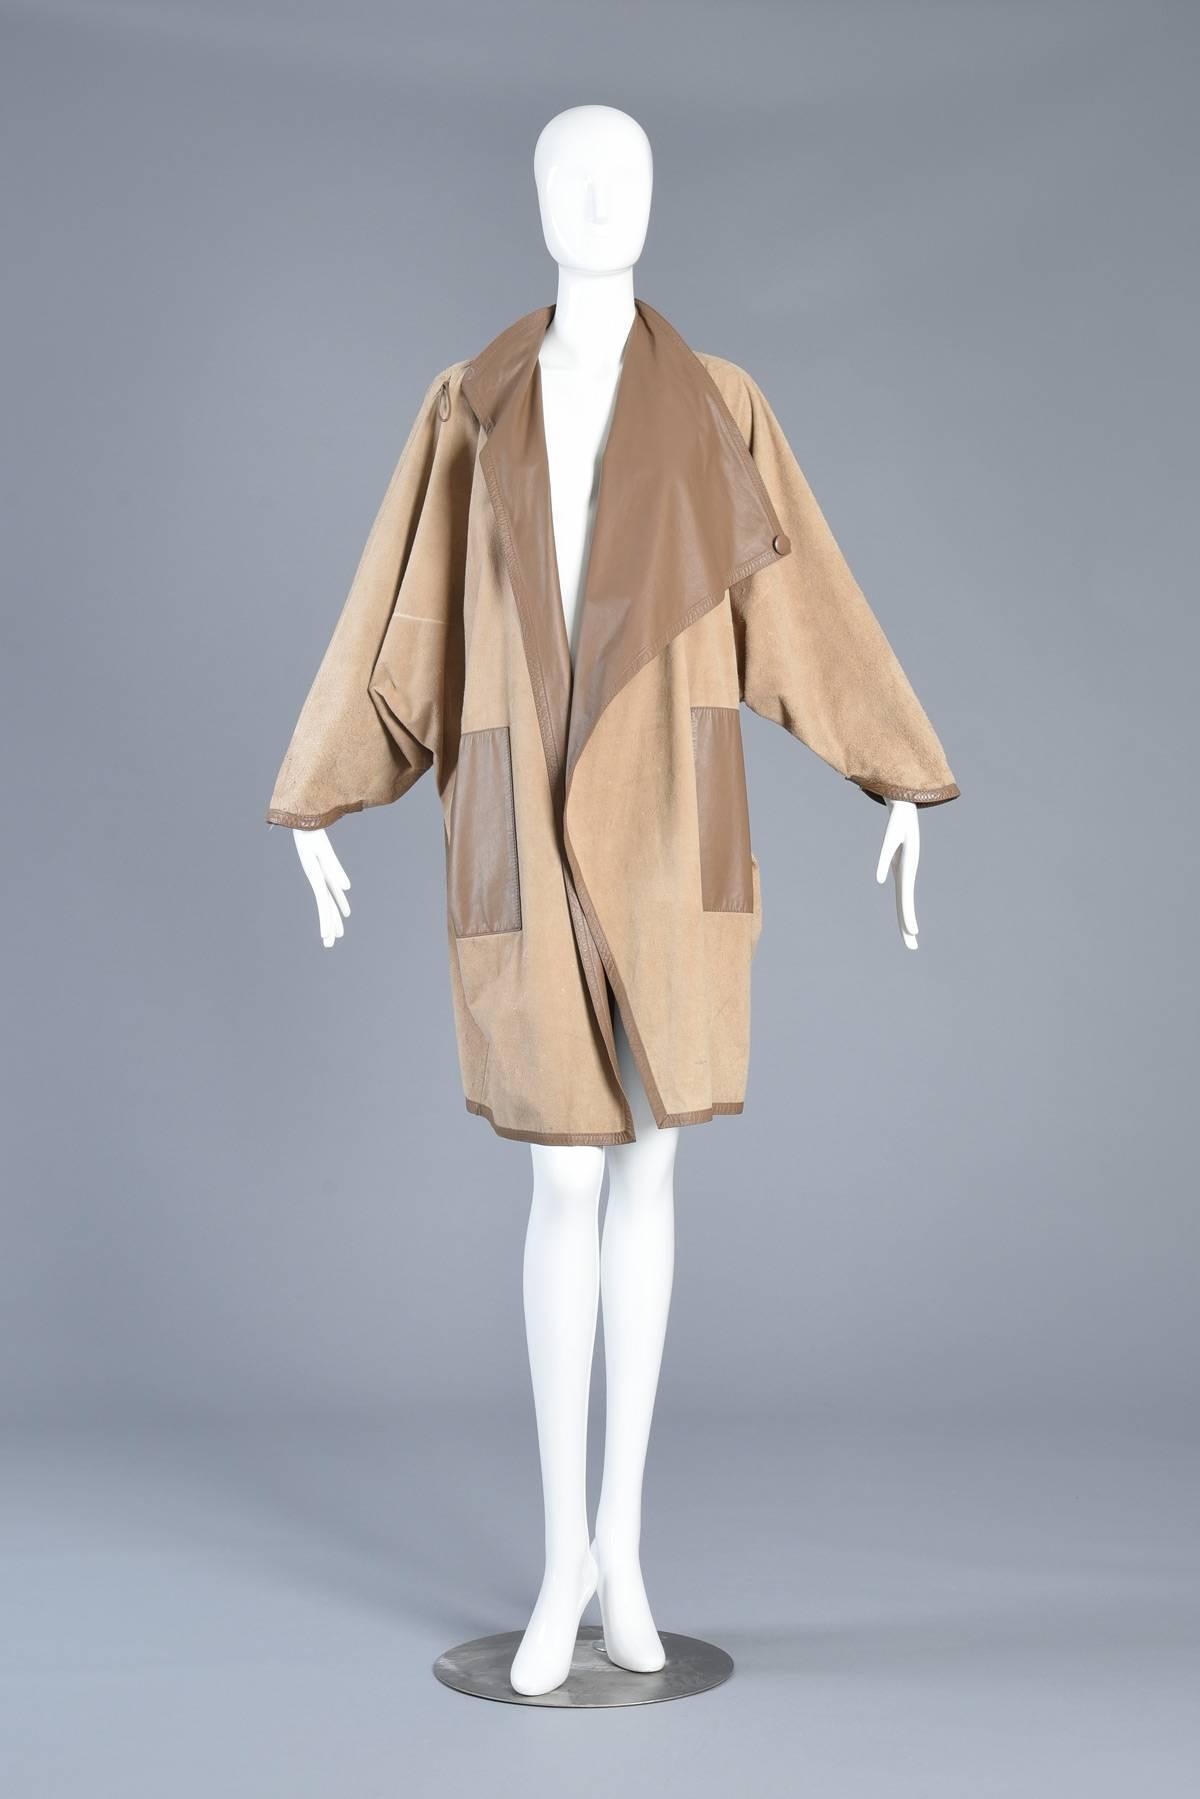 Incredible 1980s Reversible Suede Leather Avant Garde Draped Cape

MEASUREMENTS
Bust: 62